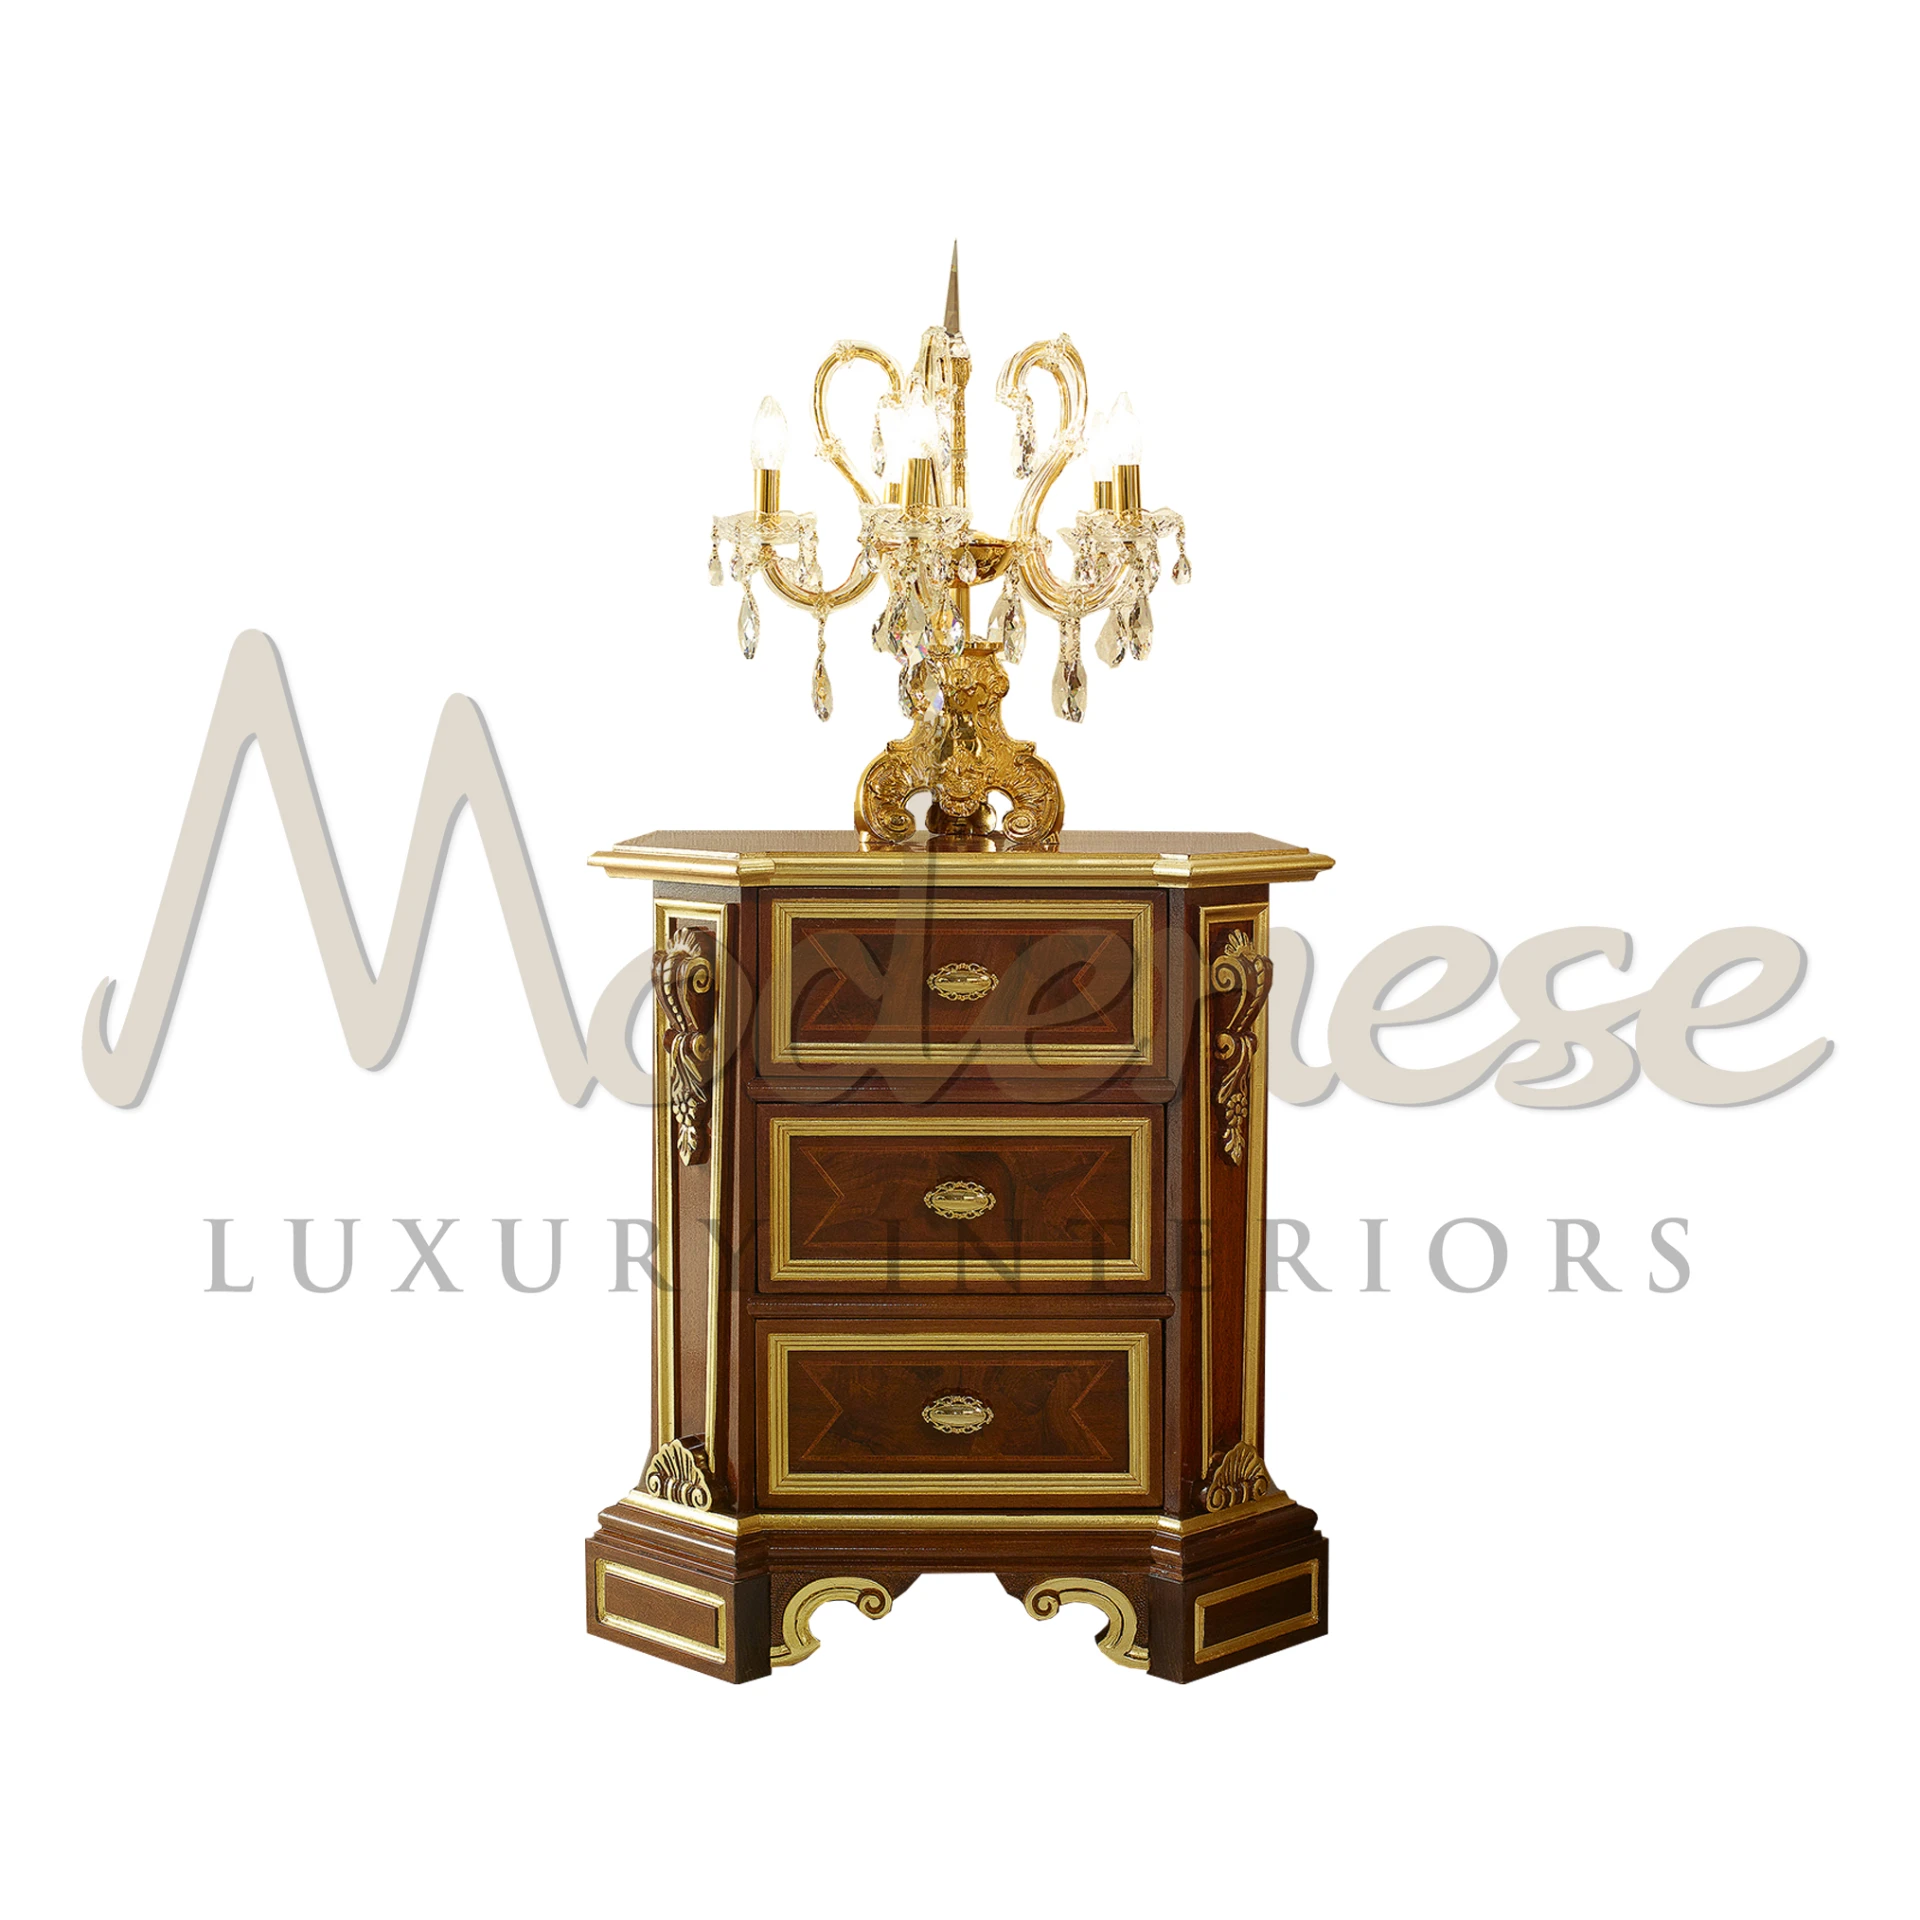 A classic solid wood nightstand by Modenese Furniture Manufacturer with intricate inlay work and brass handles, crowned with a decorative golden candelabra.